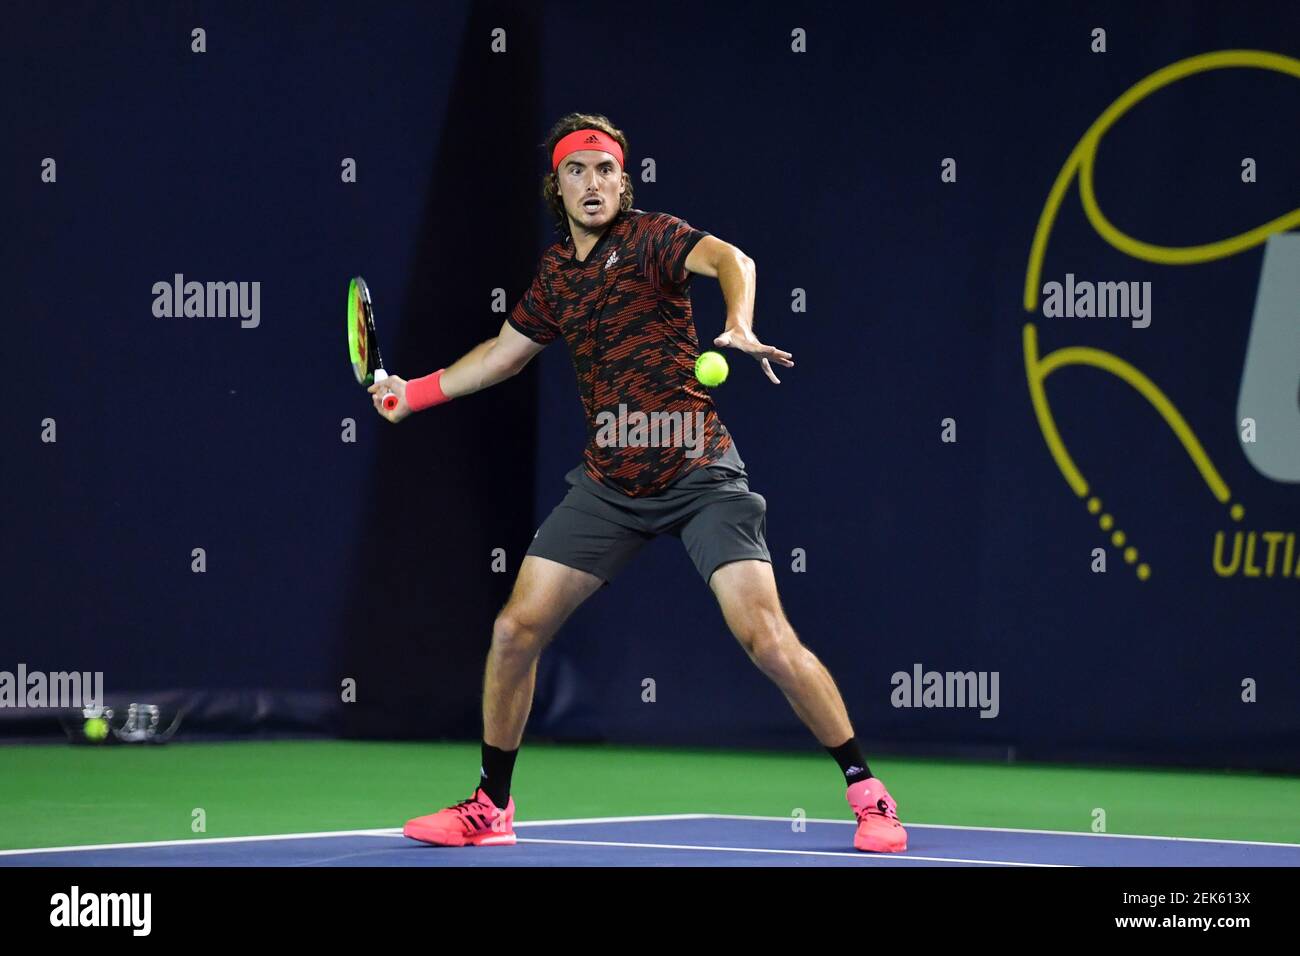 Benoit Paire vs Stefanos Tsitsipas at the Patrick Mouratoglou Academy  launches, this Sunday, on June 14, 2020 his big idea: the Ultimate tennis  showdown (UTS). A tennis competition which breaks free from